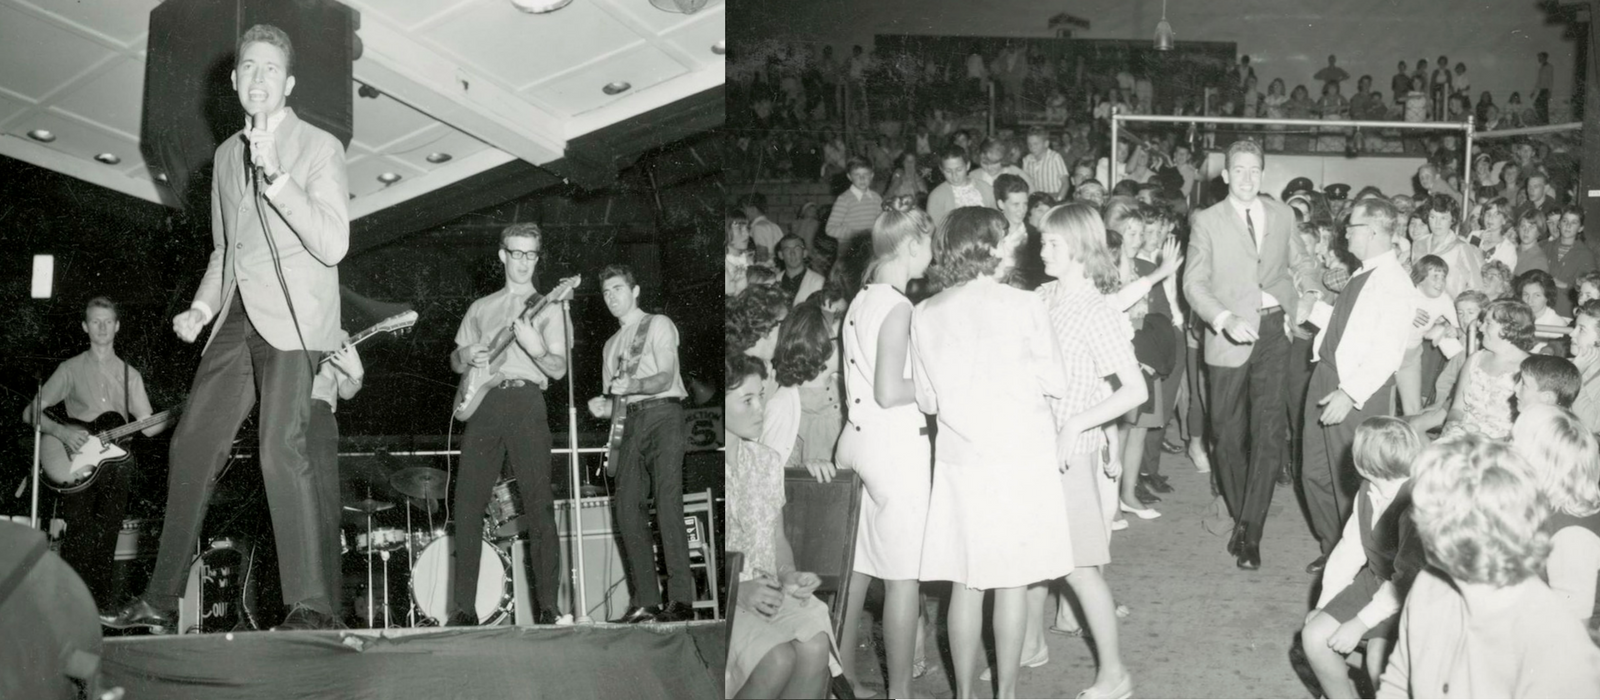 Two black and white photos featuring Jimmy Hannan performing at the Sydney Stadium with a band. The photo on the right shows him making his way to the stage through fans.